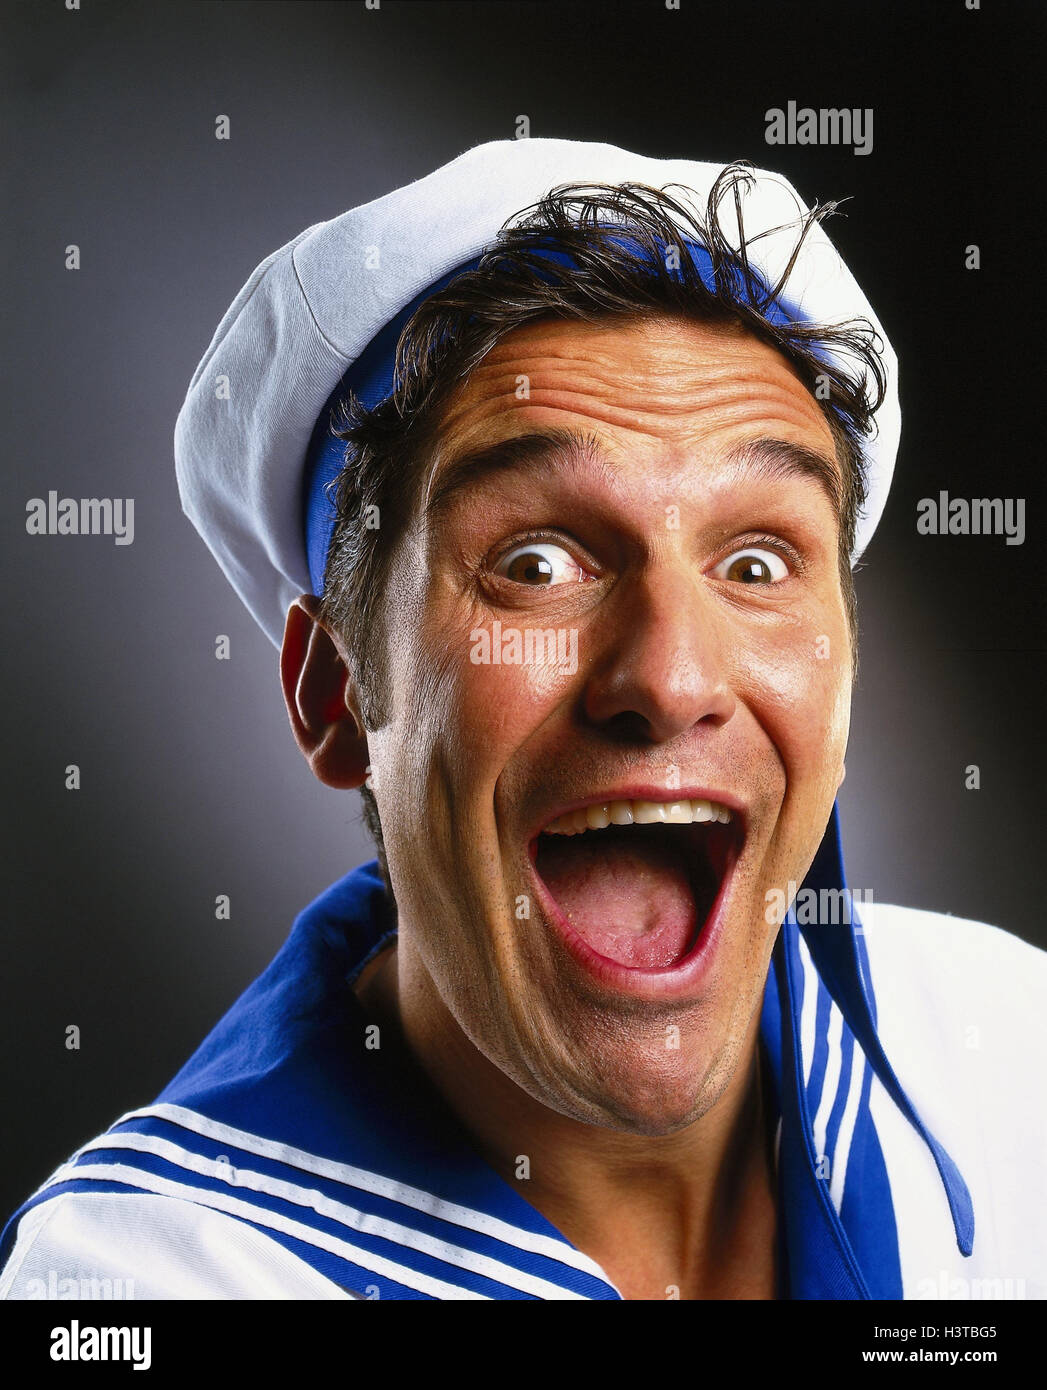 Sailor, facial play, enthusiasm, portrait, professions, studio, cut out, surprise, is surprised, astonishment, astonished, man, young, enthusiastically, surprises, Stock Photo